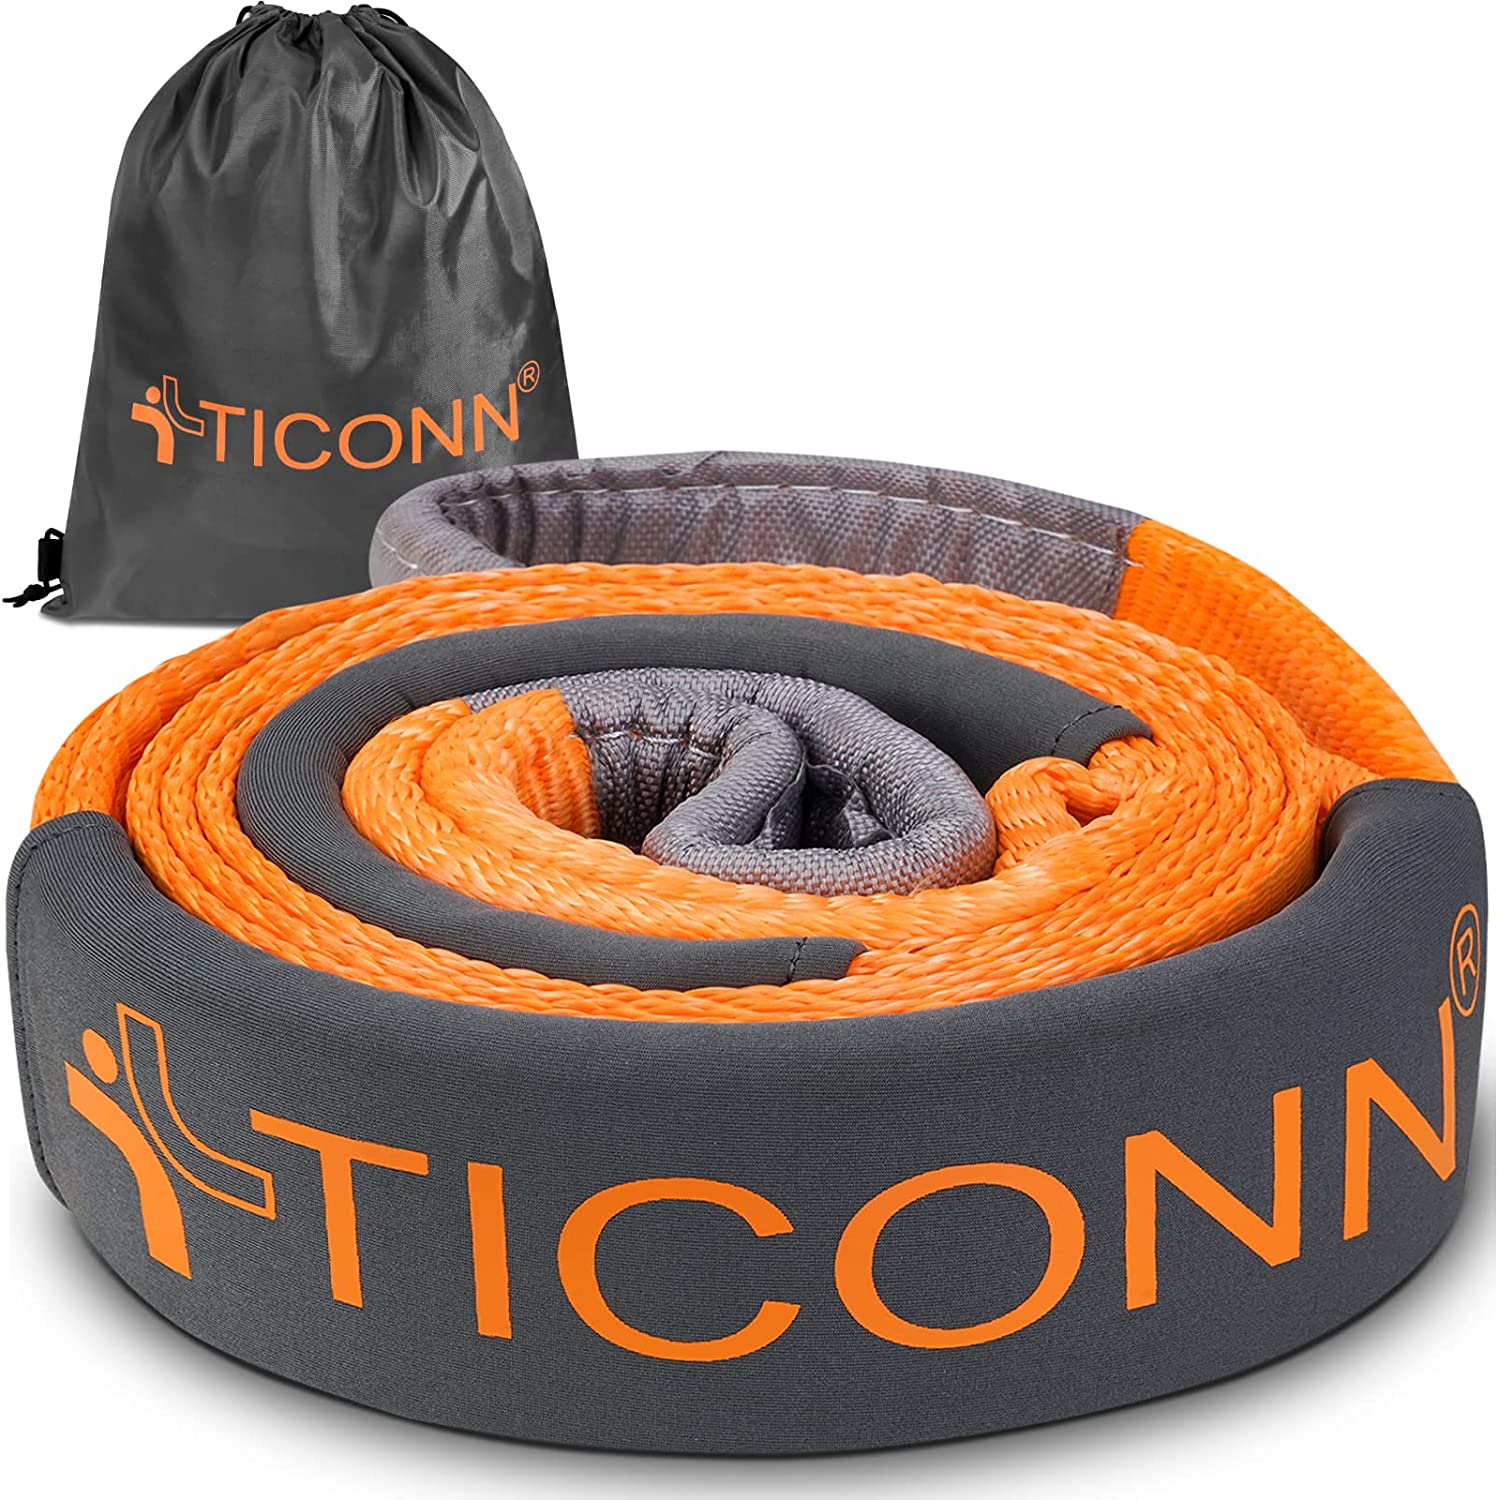 TICONN Recovery Tow Strap and Combo $24.49 + Free Shipping w/ Amazon Prime or Orders $25+